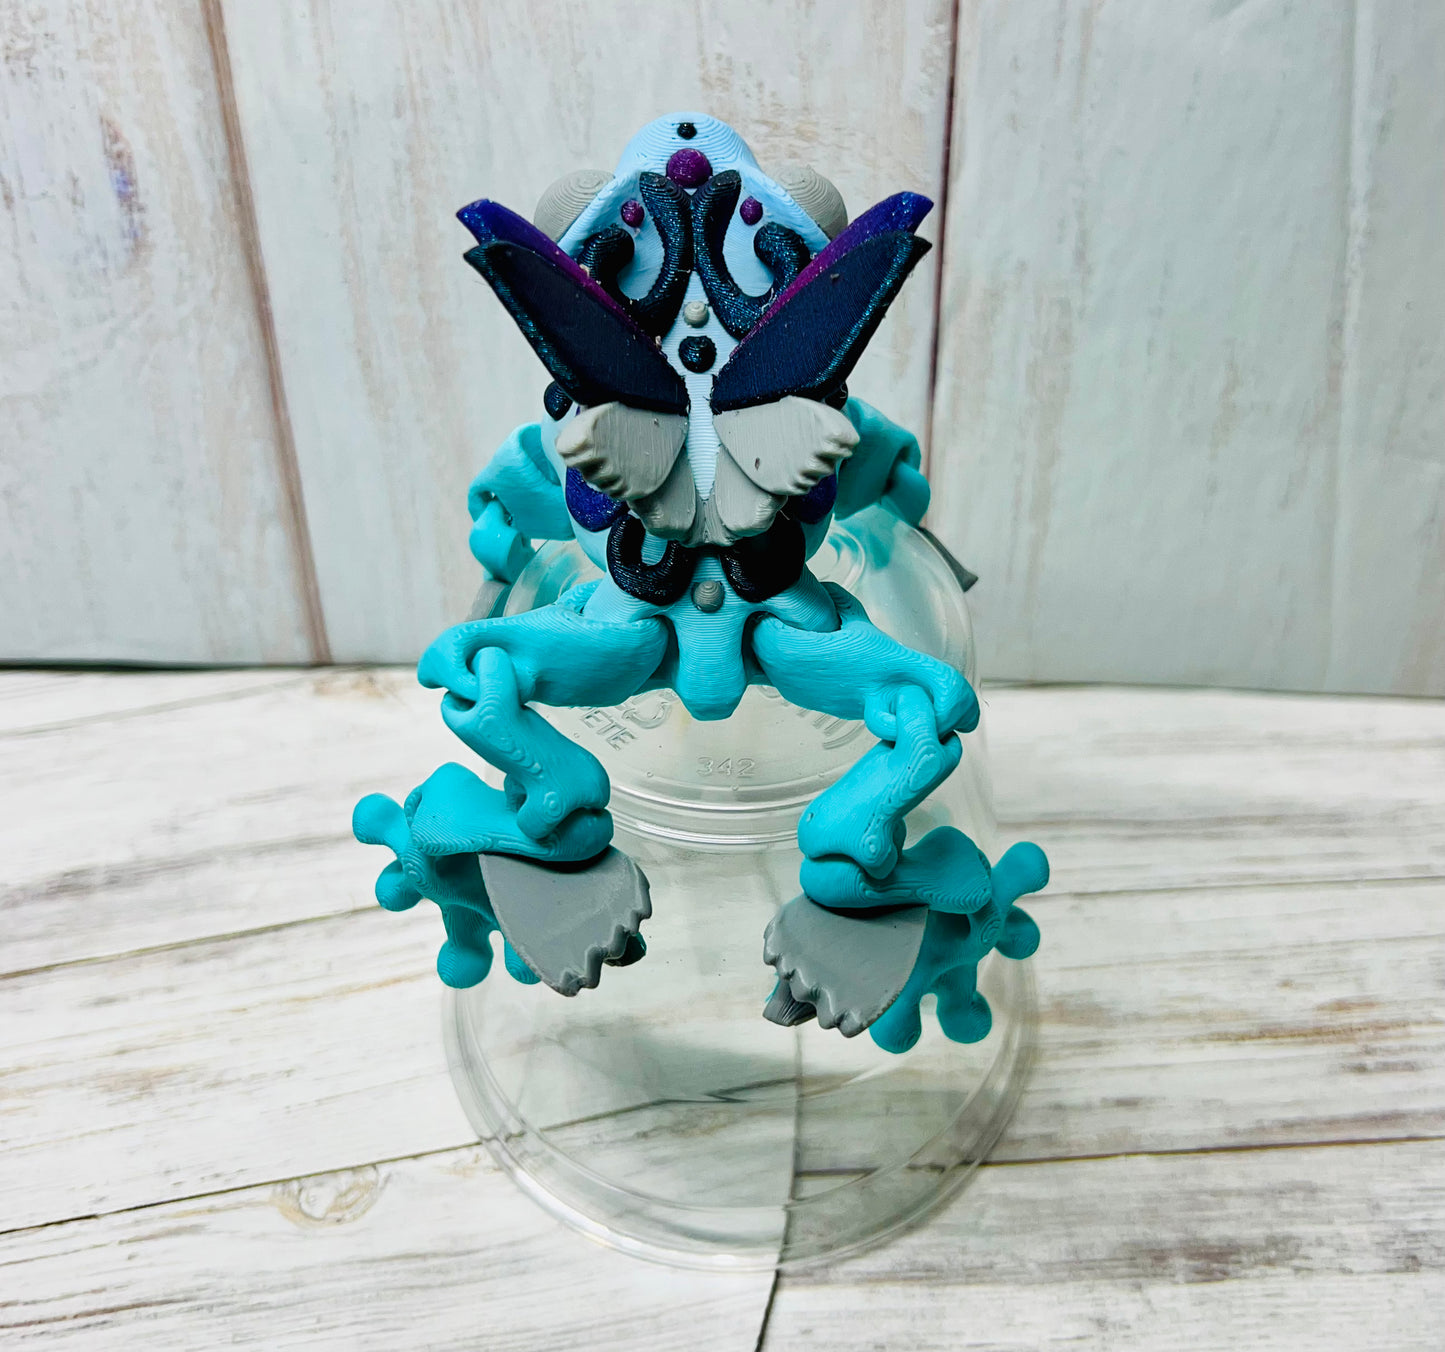 3D Printed Articulated FrogiFly